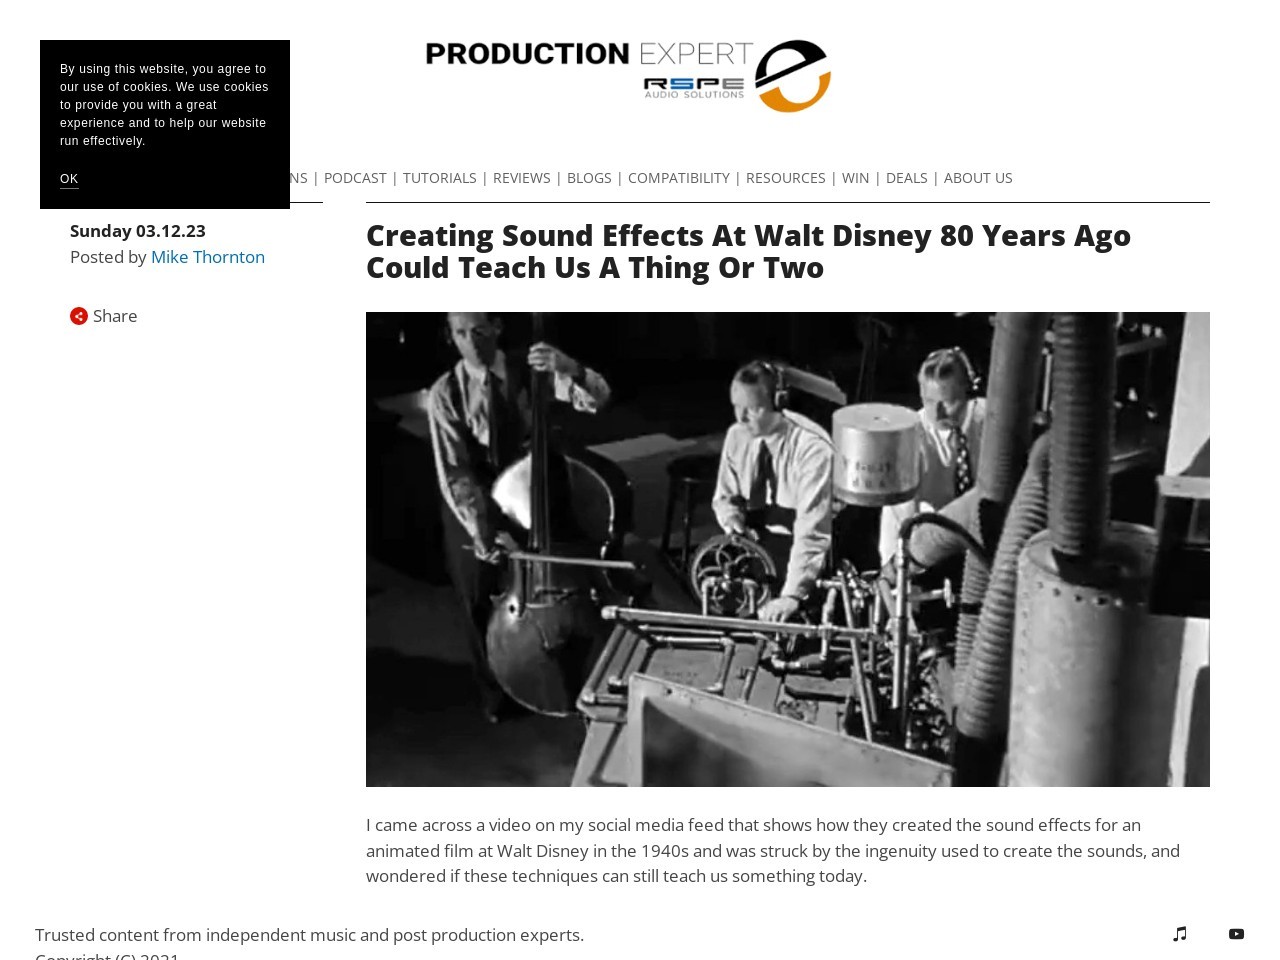 Creating Sound Effects At Walt Disney 80 Years Ago Could Teach Us A Thing Or Two | Production Expert